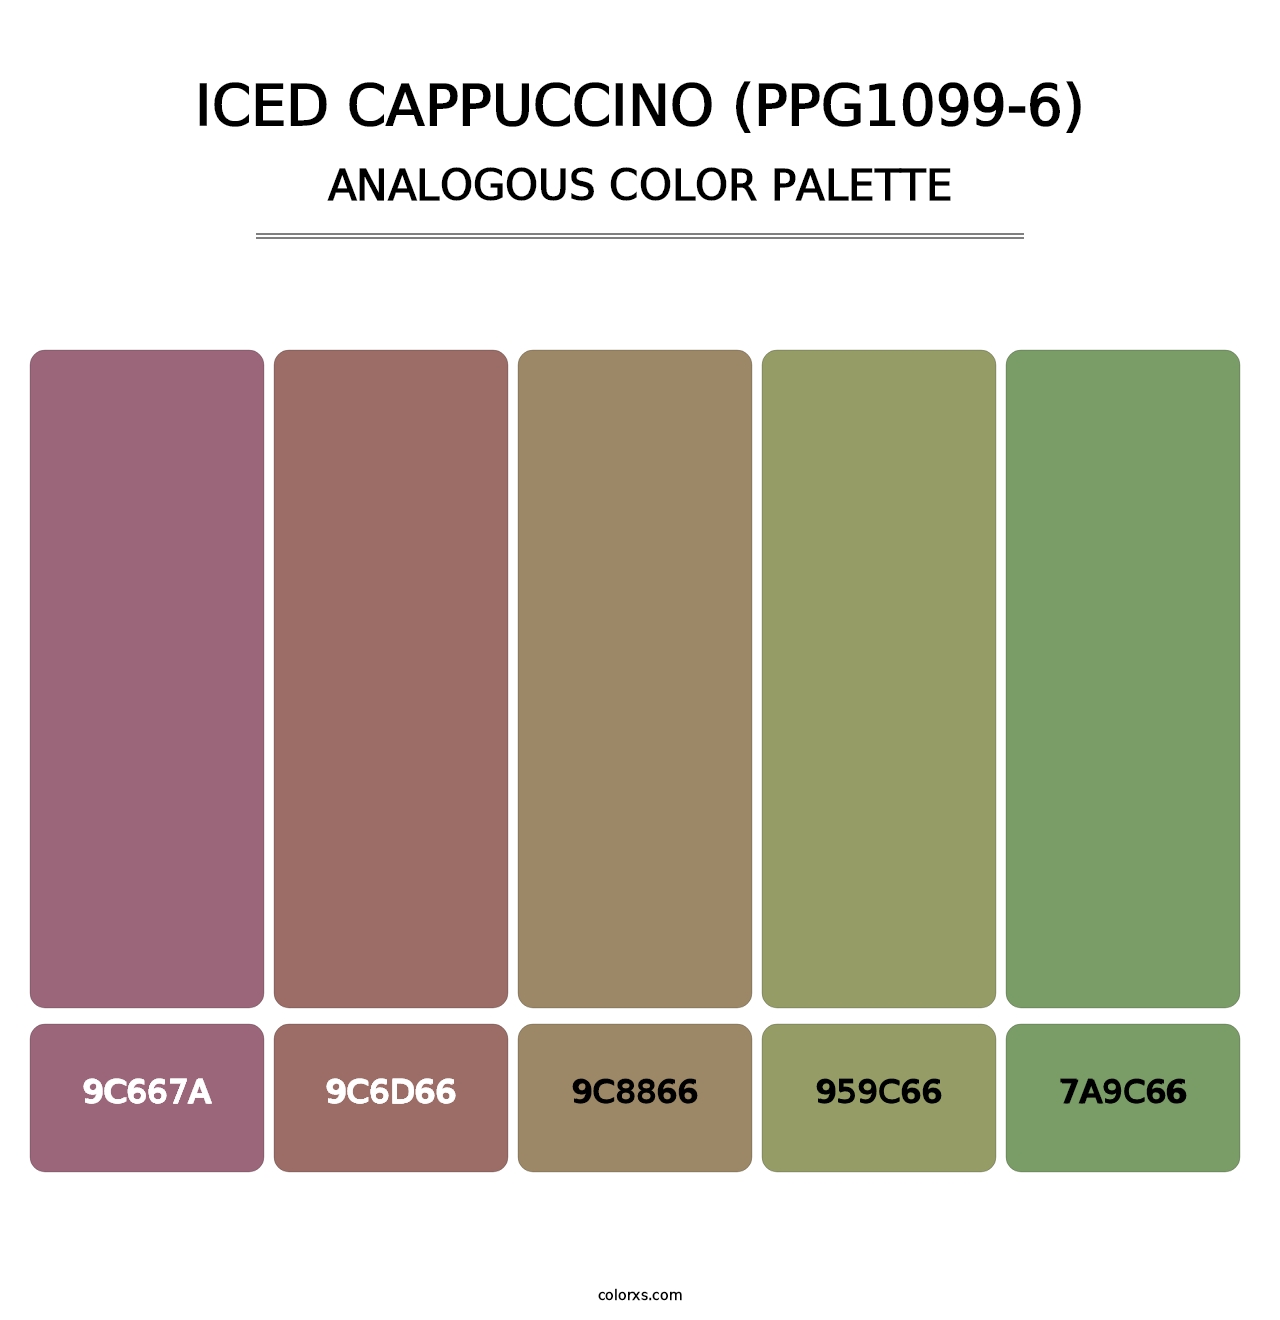 Iced Cappuccino (PPG1099-6) - Analogous Color Palette